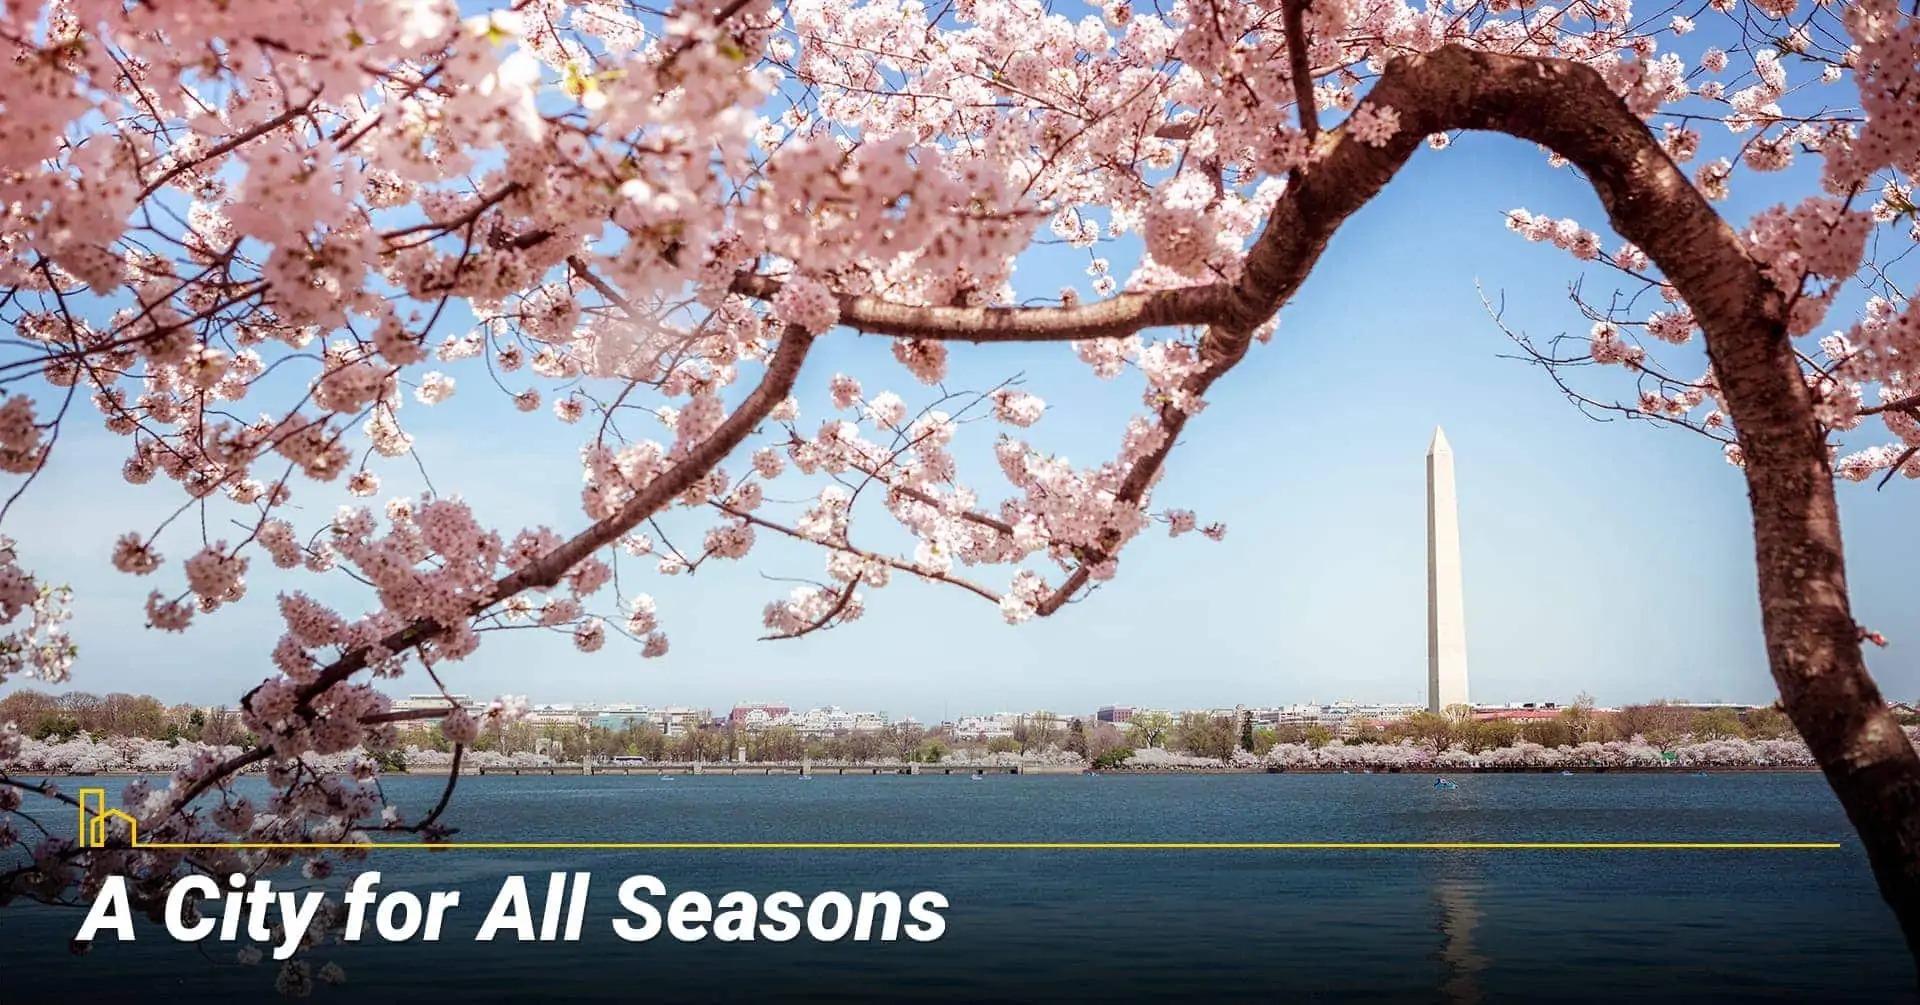 A City for All Seasons in Washington, DC